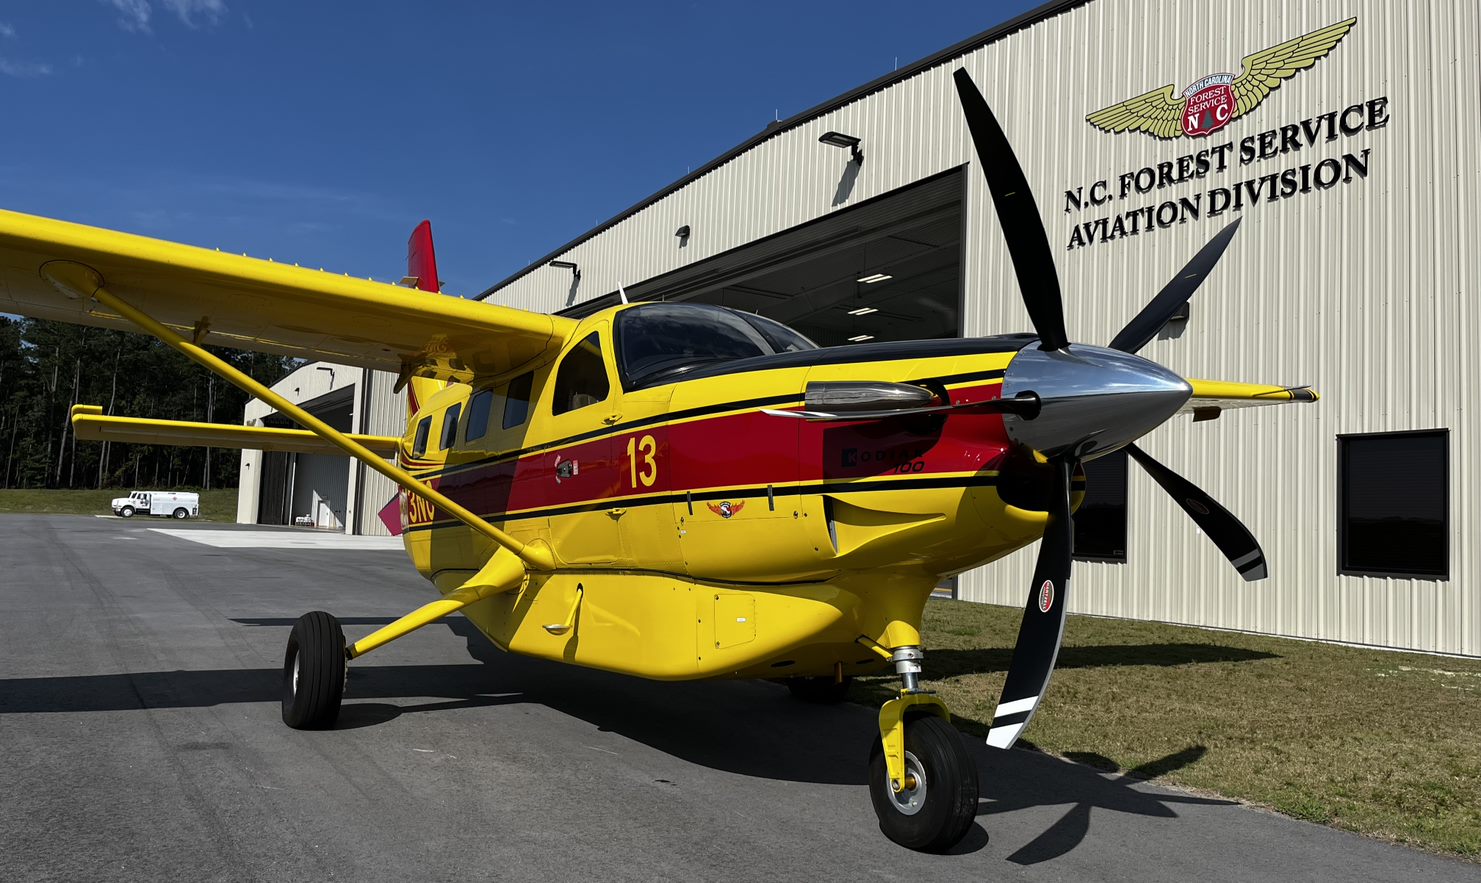 The state of North Carolina receives Daher’s first Kodiak 100 multi-mission aircraft equipped with a five-blade composite propeller